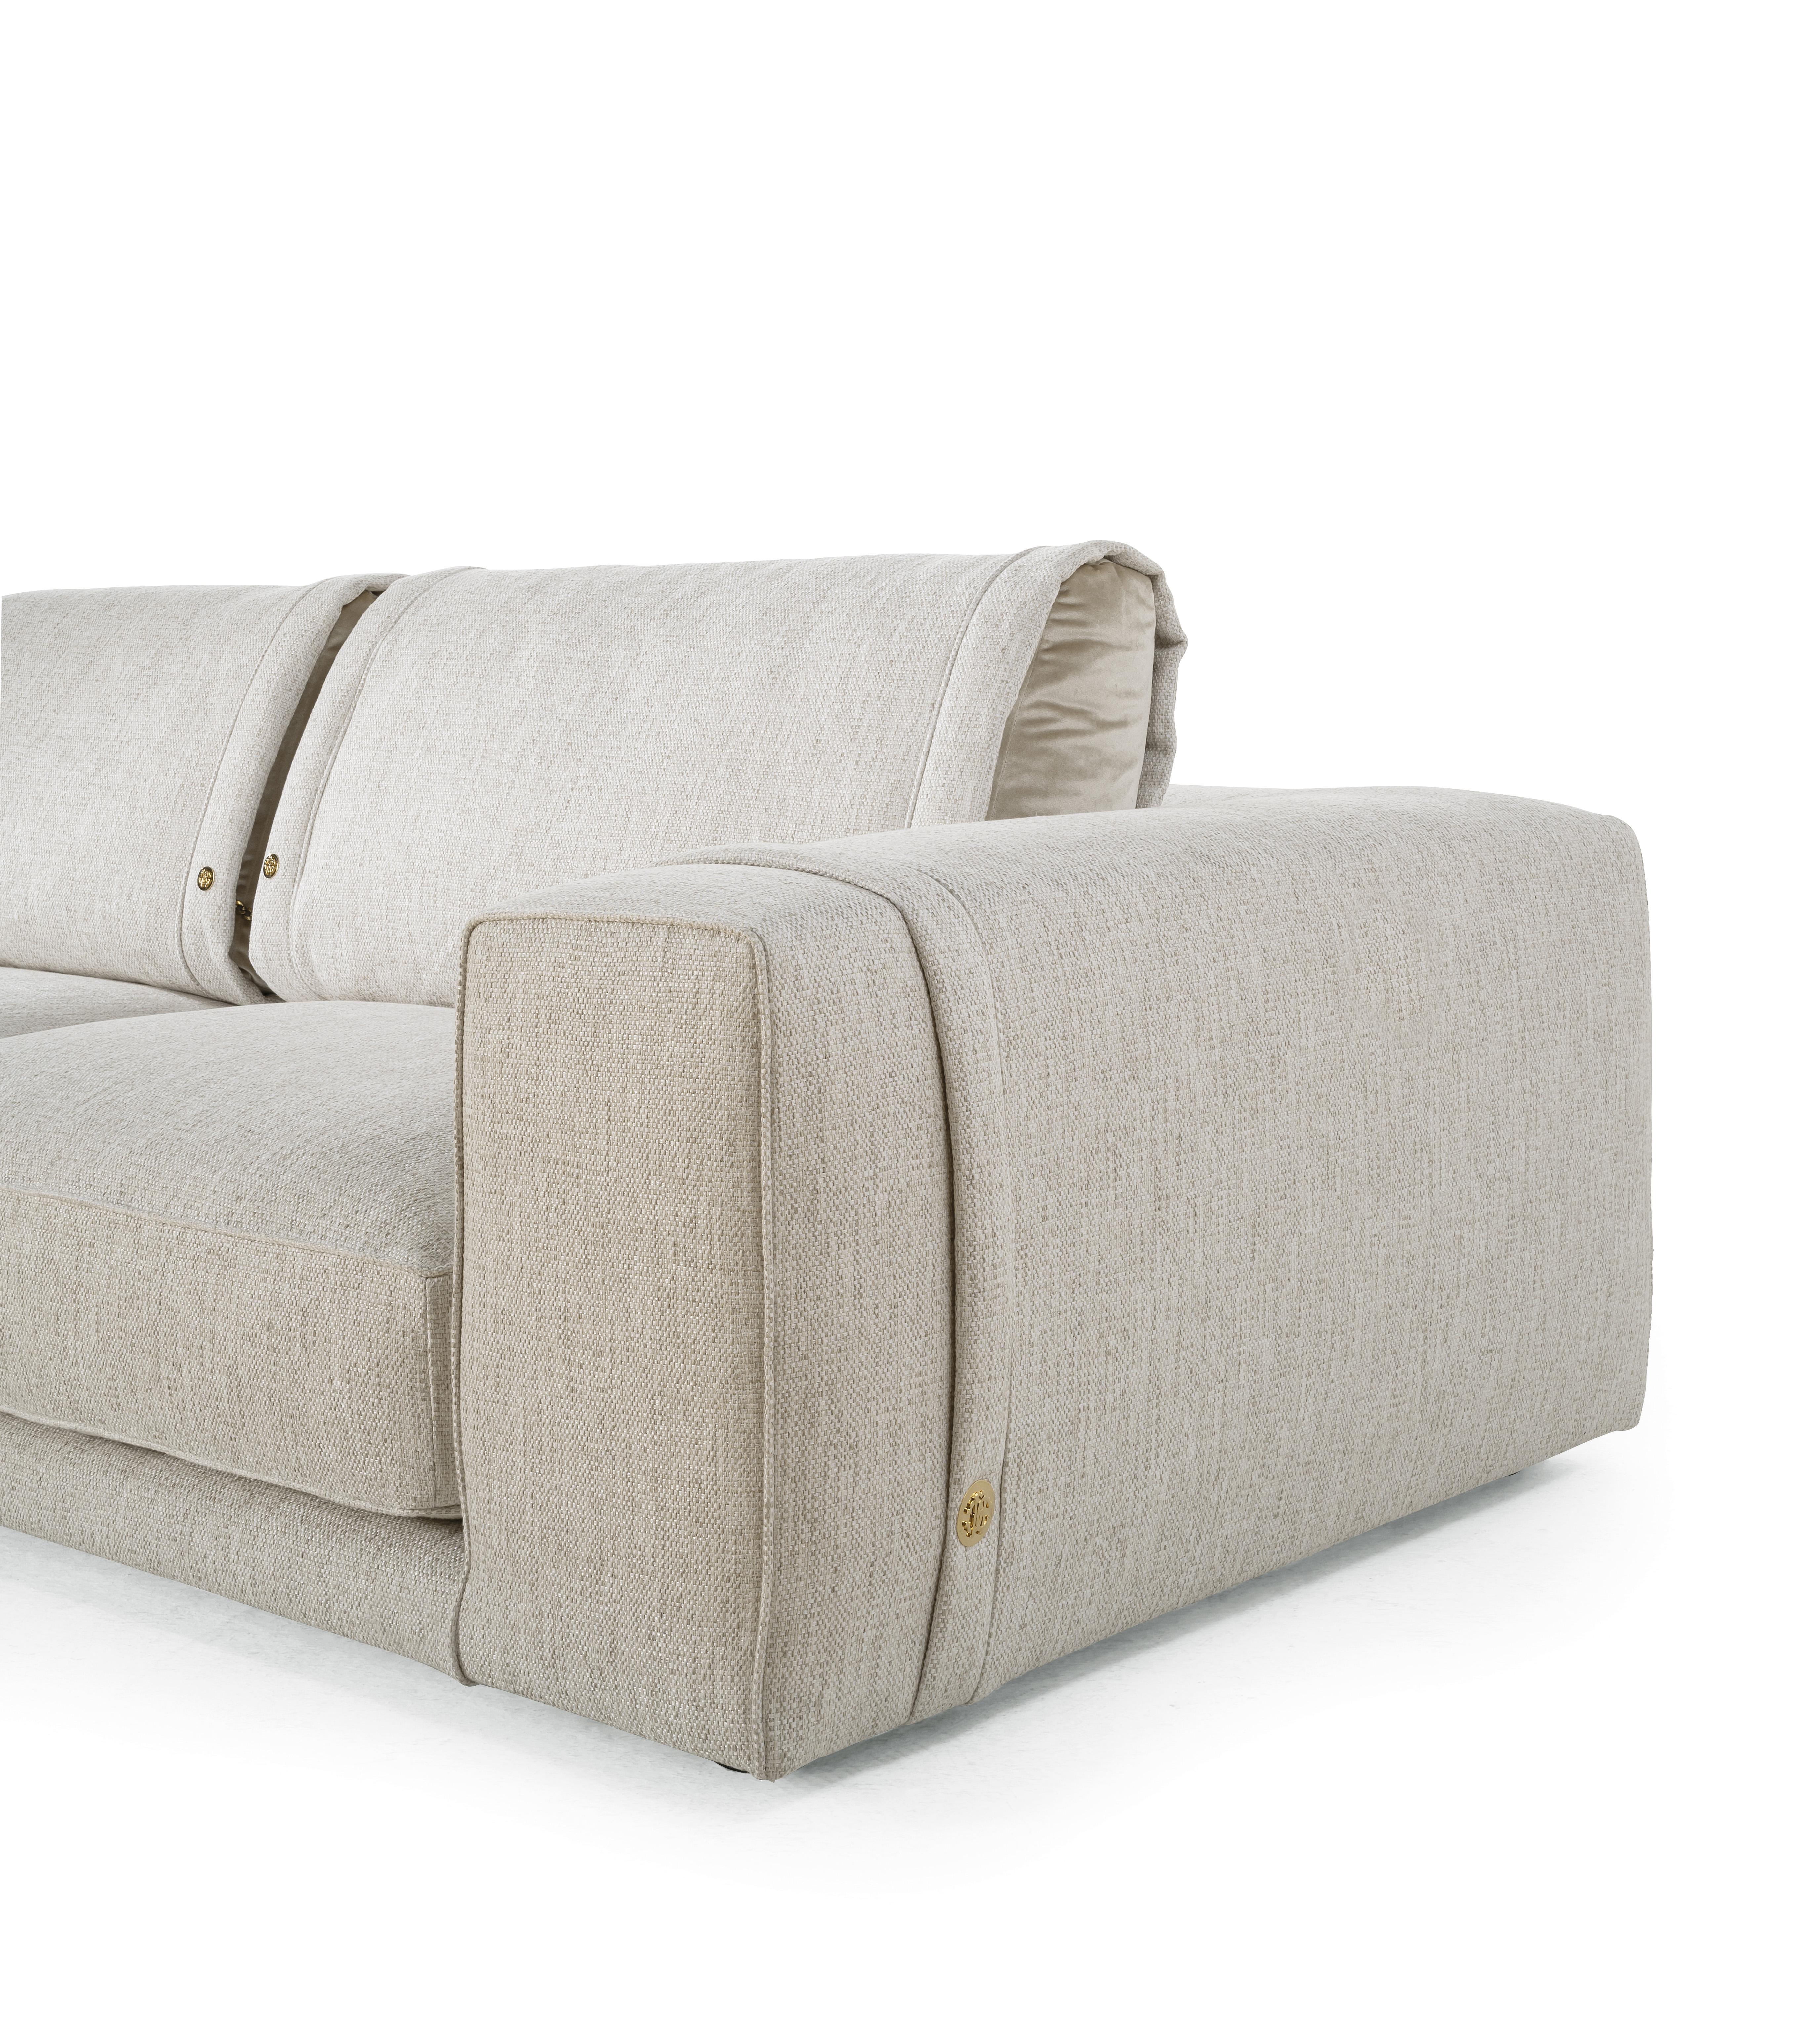 Modern 21st Century Smoking 2 Sofa in Fabric by Roberto Cavalli Home Interiors For Sale